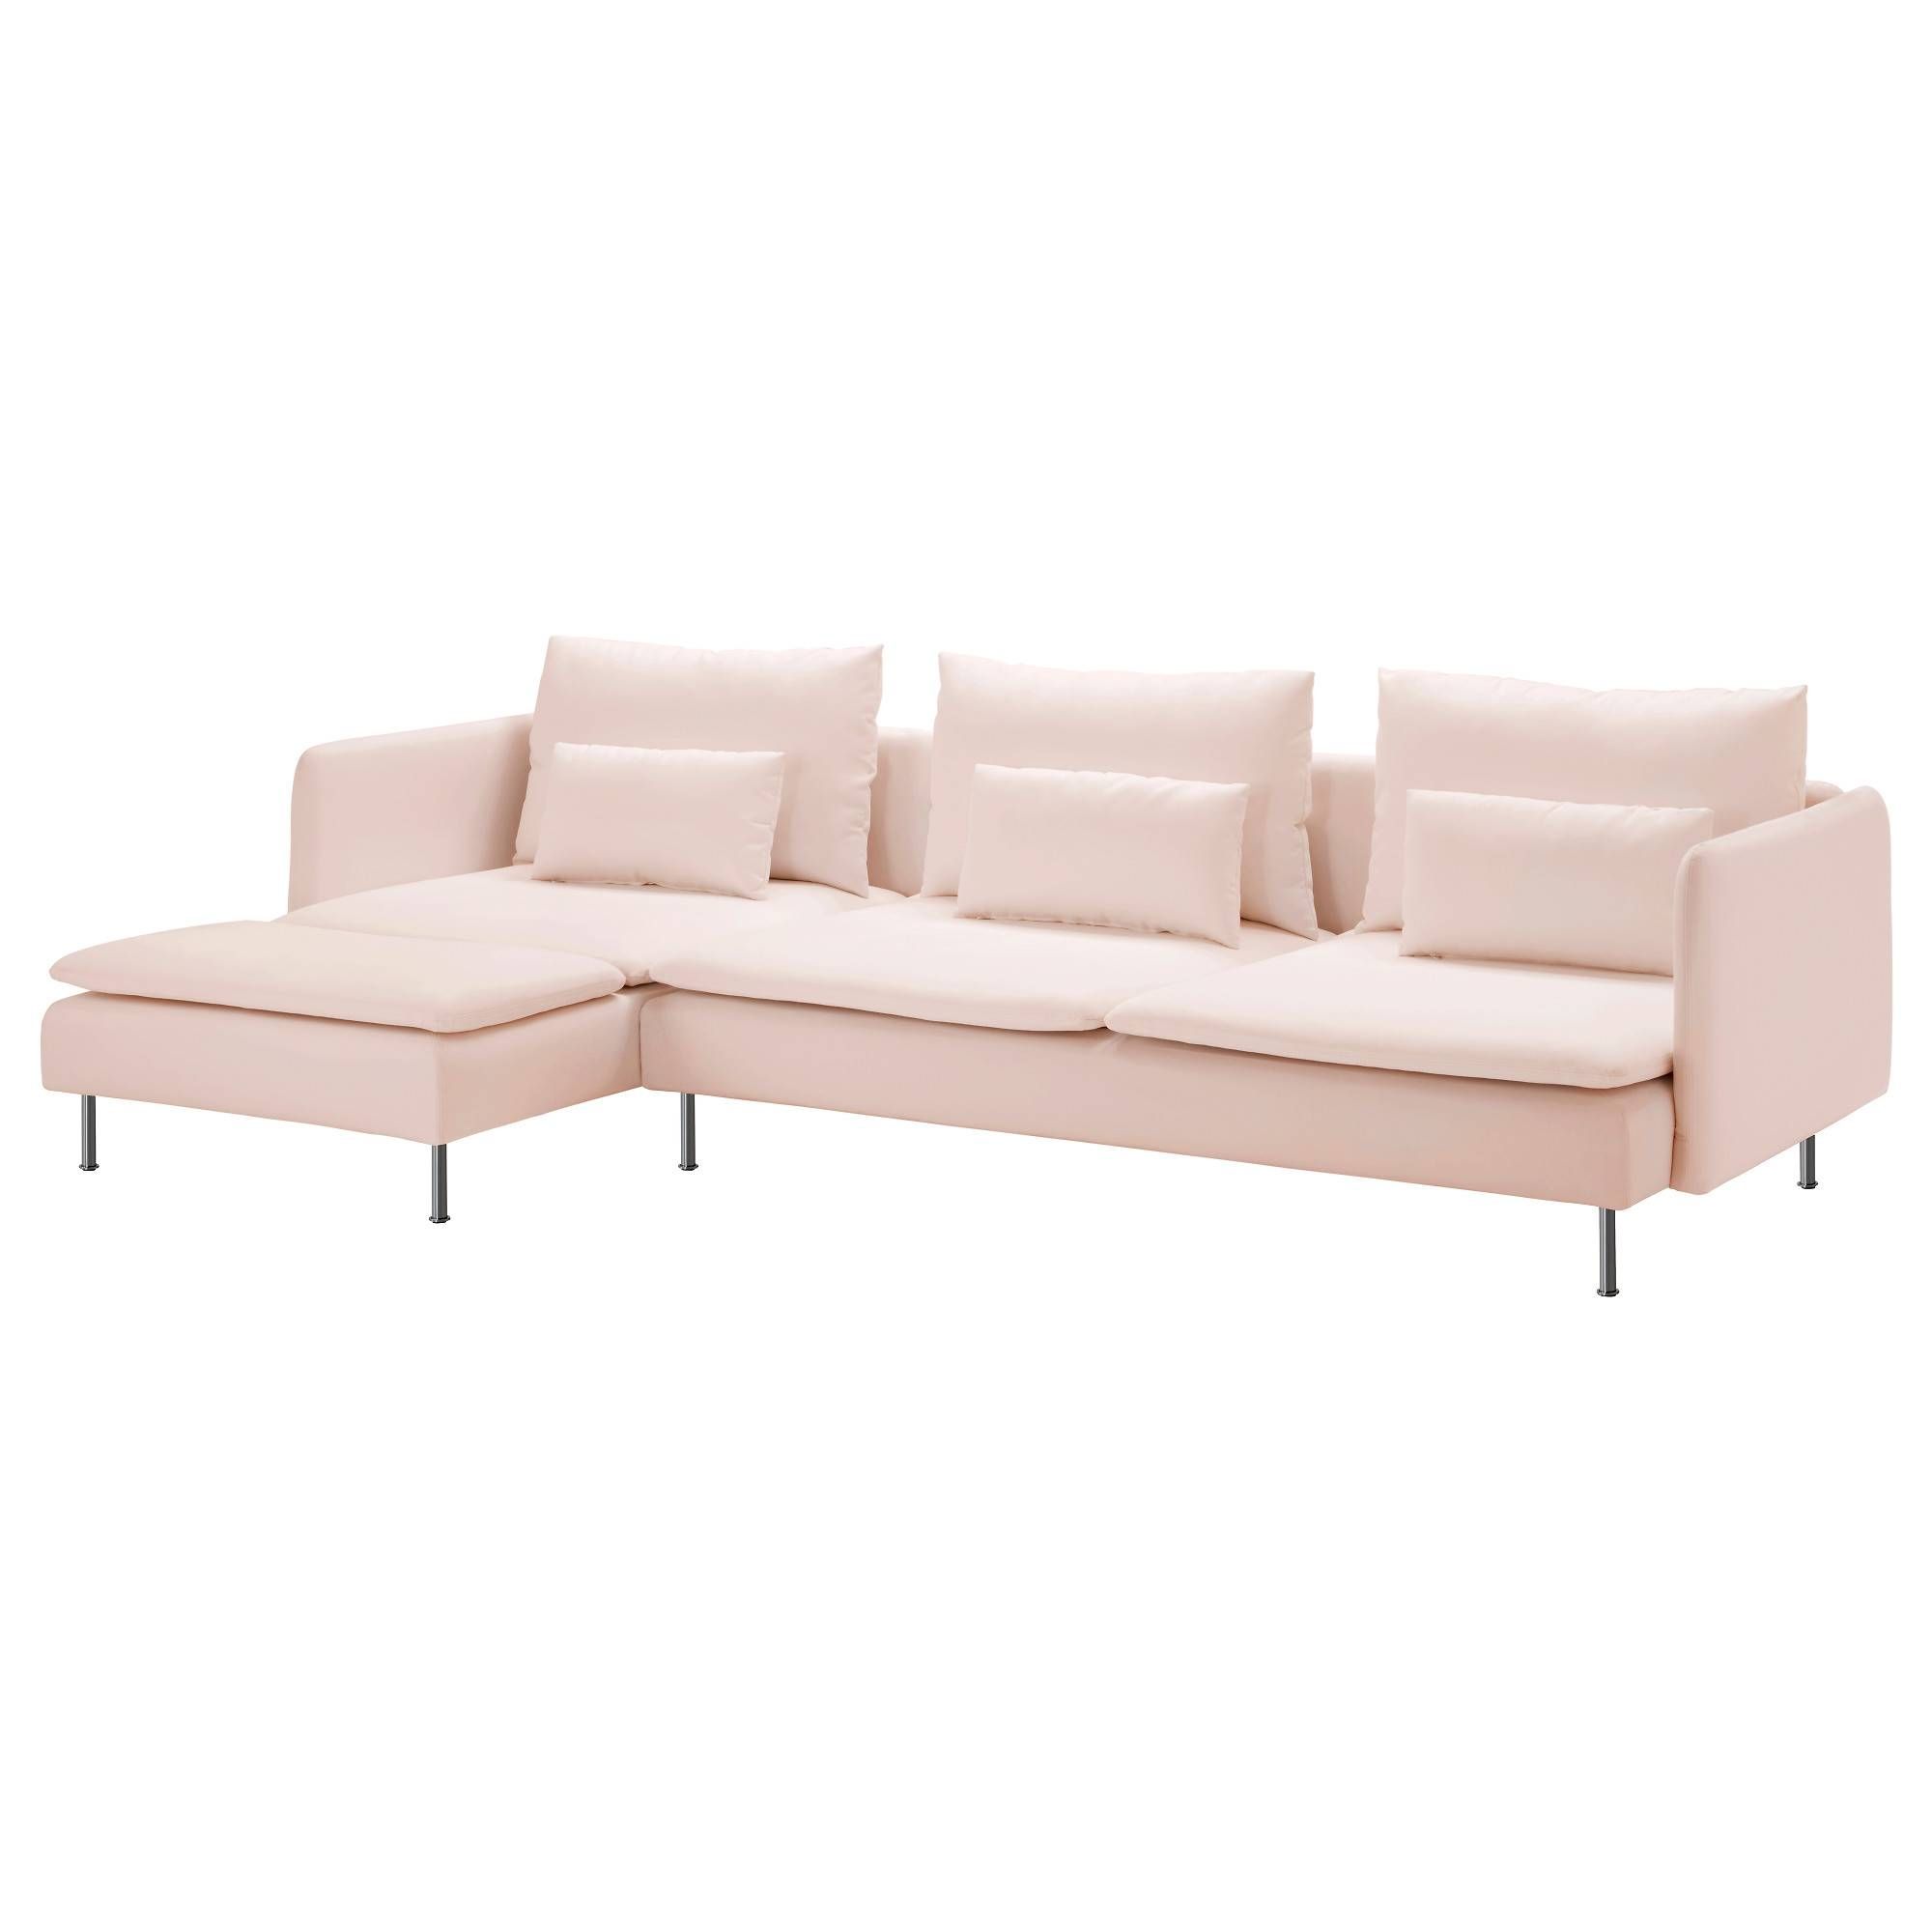 Söderhamn Three Seat Sofa And Chaise Longue Samsta Light Pink – Ikea Intended For Ikea Chaise Lounge Sofa (Photo 22 of 30)